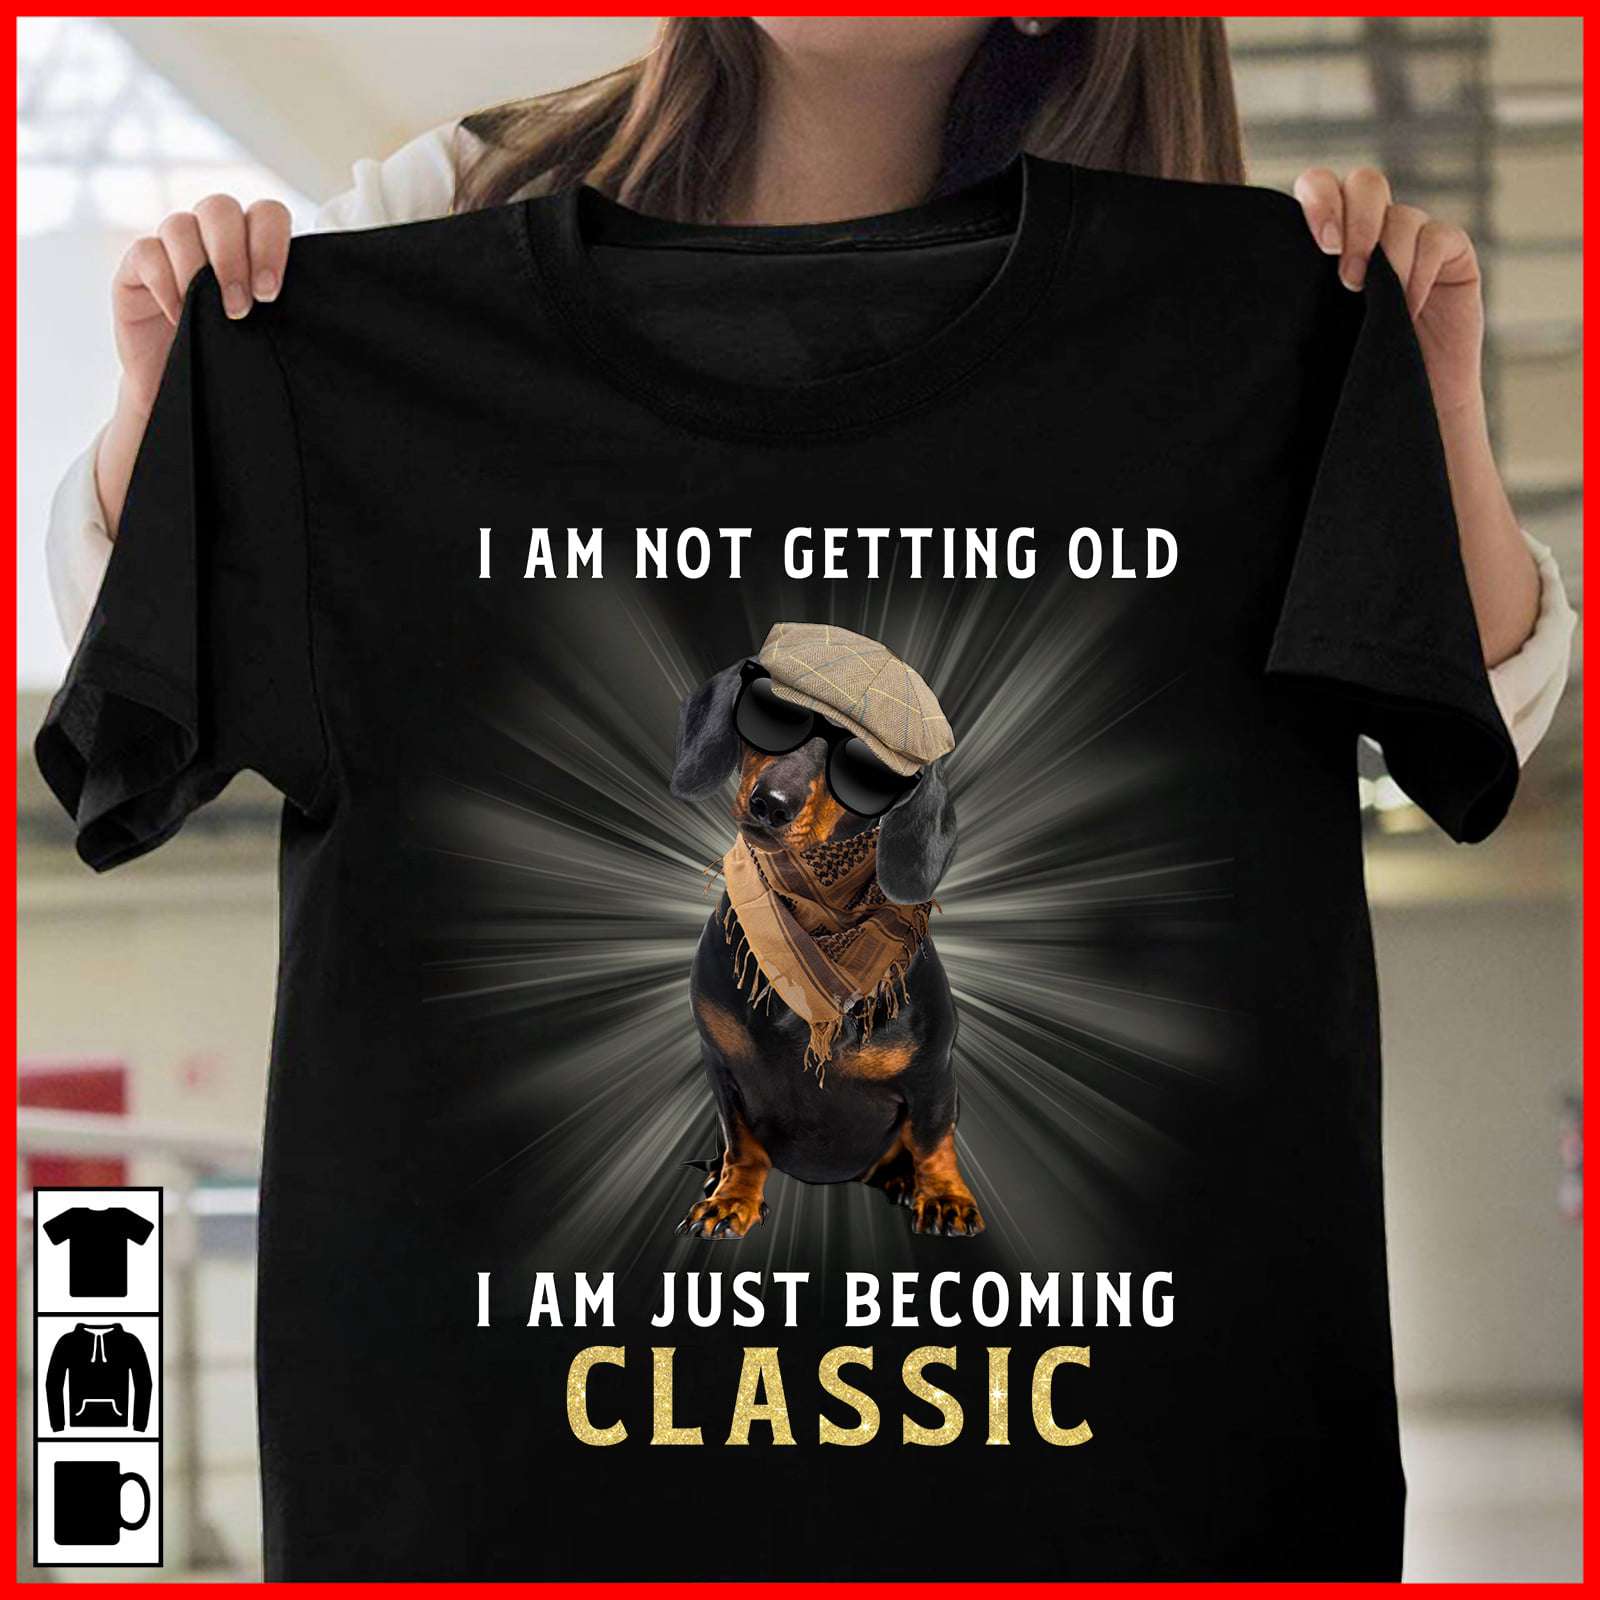 I am not getting old i am just becoming classic - Vintage Chihuahua, Vintage Fashion